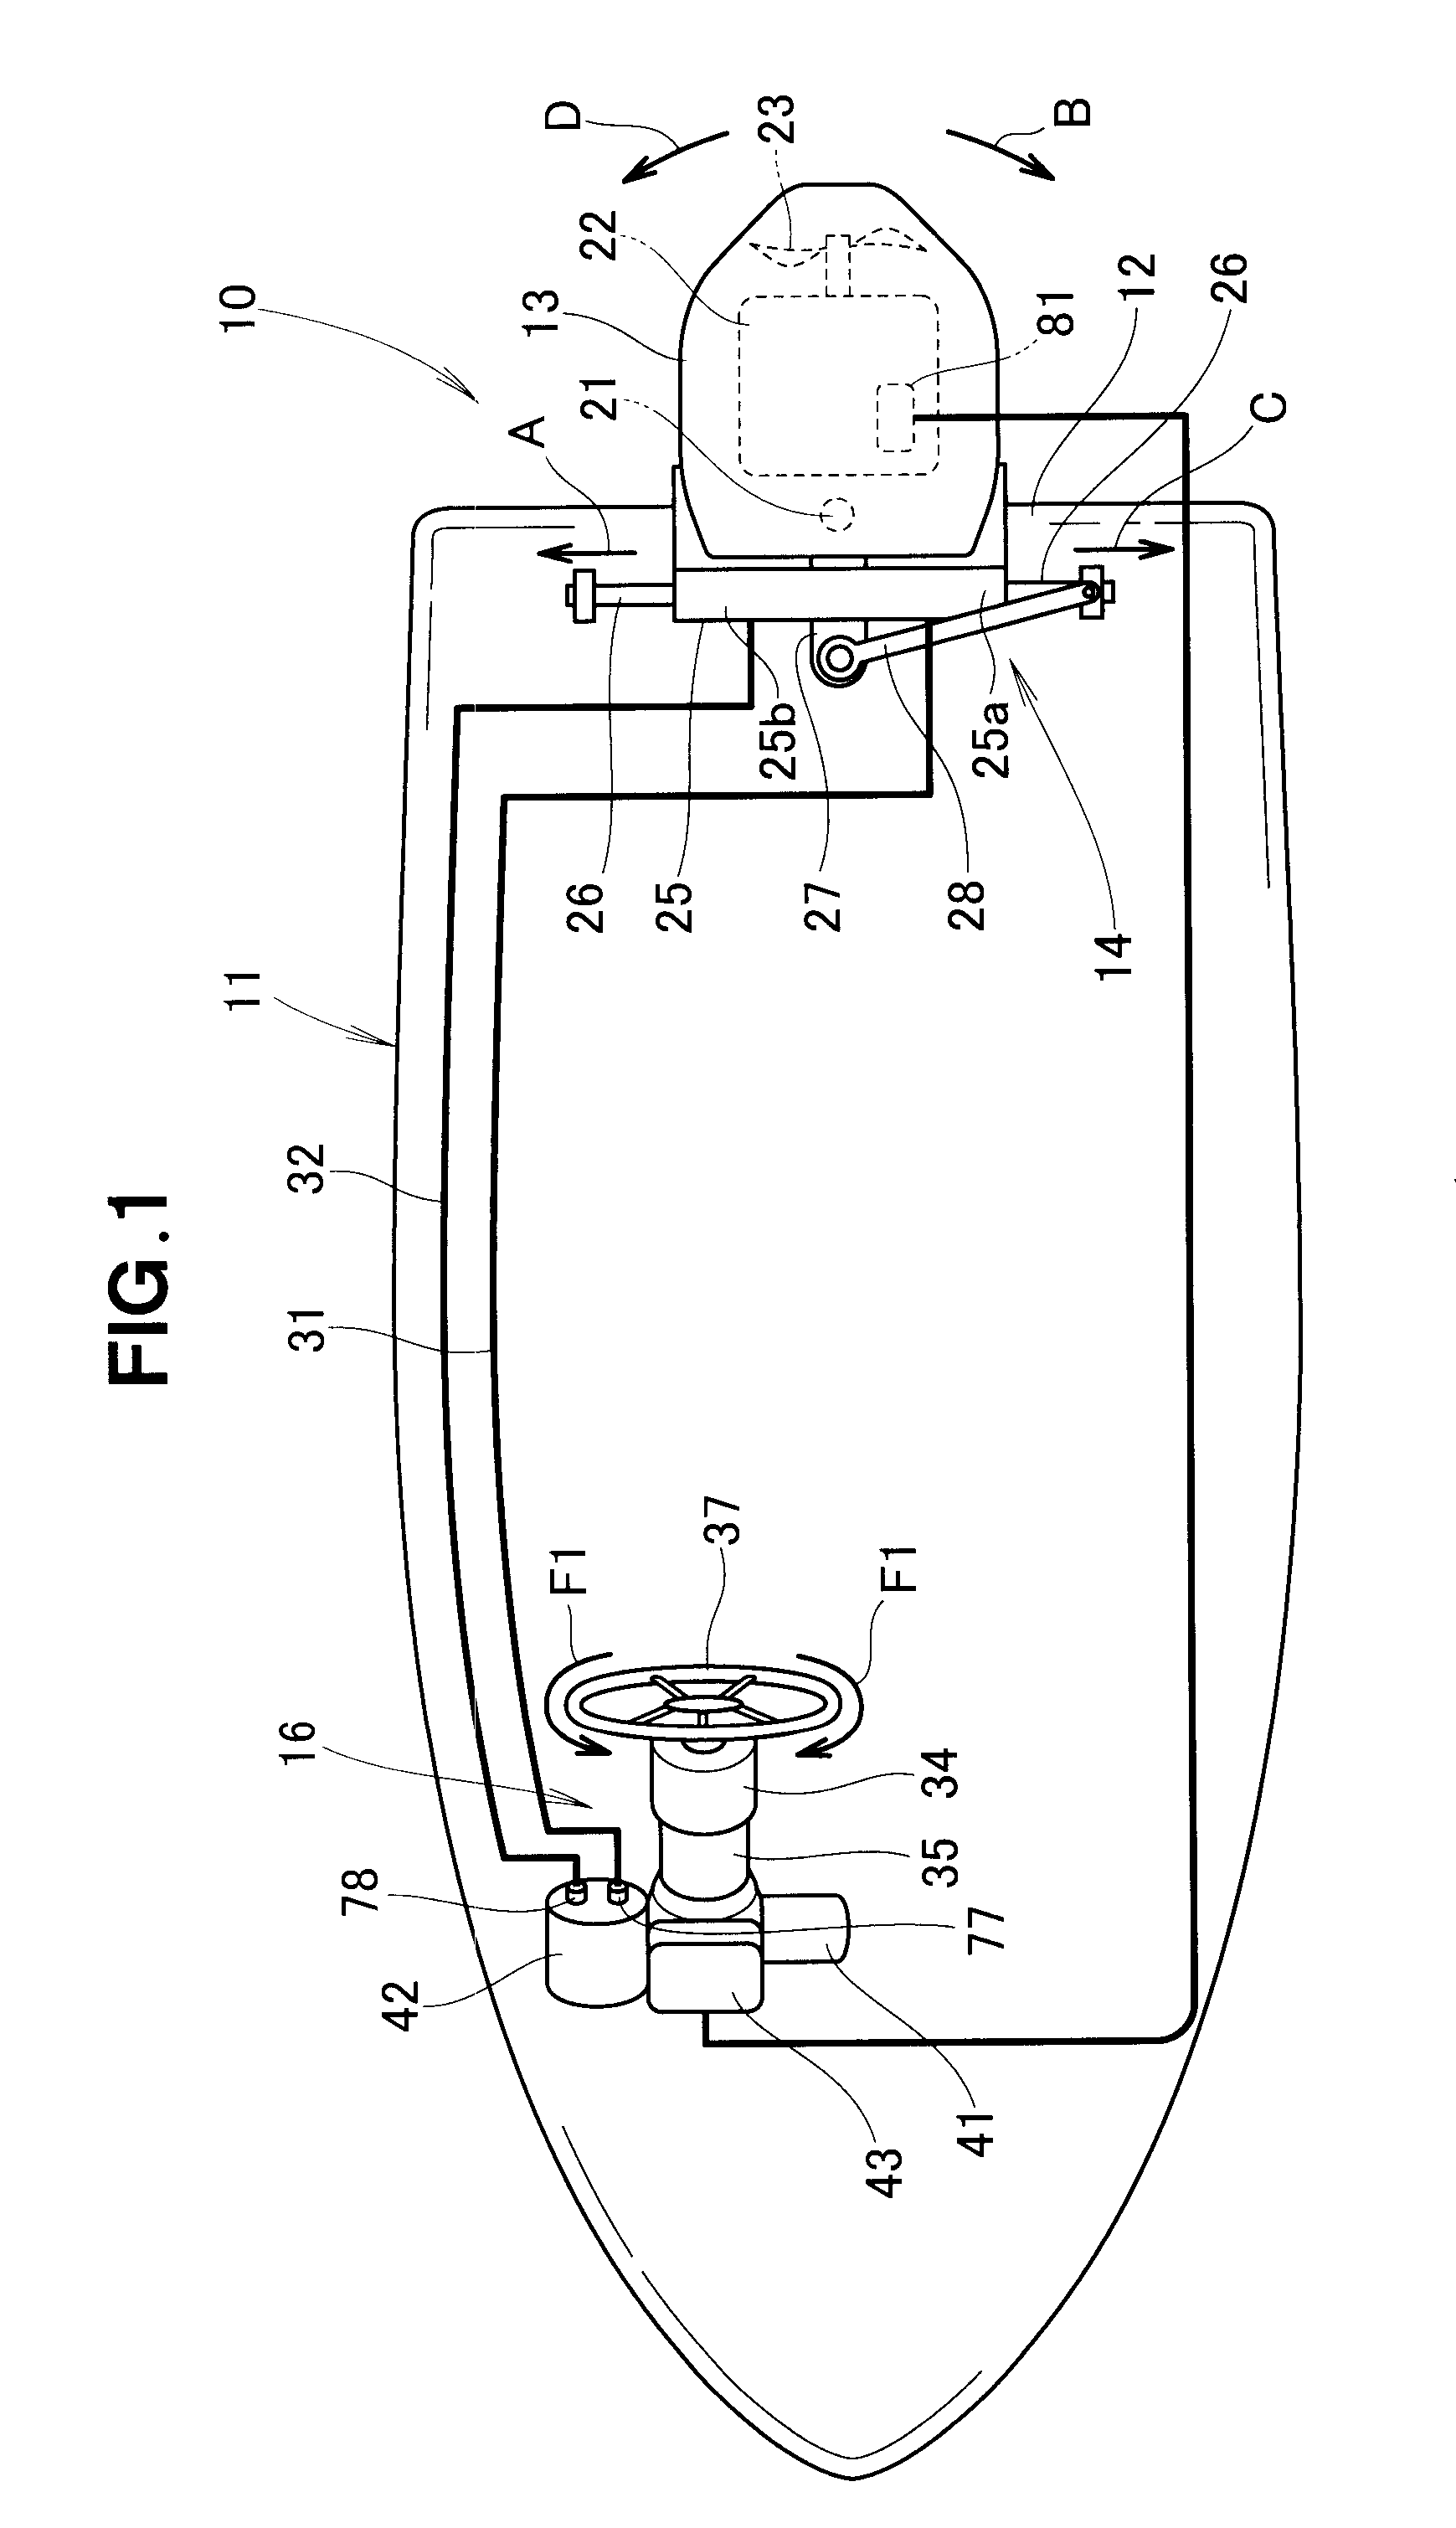 Steering device for outboard engine